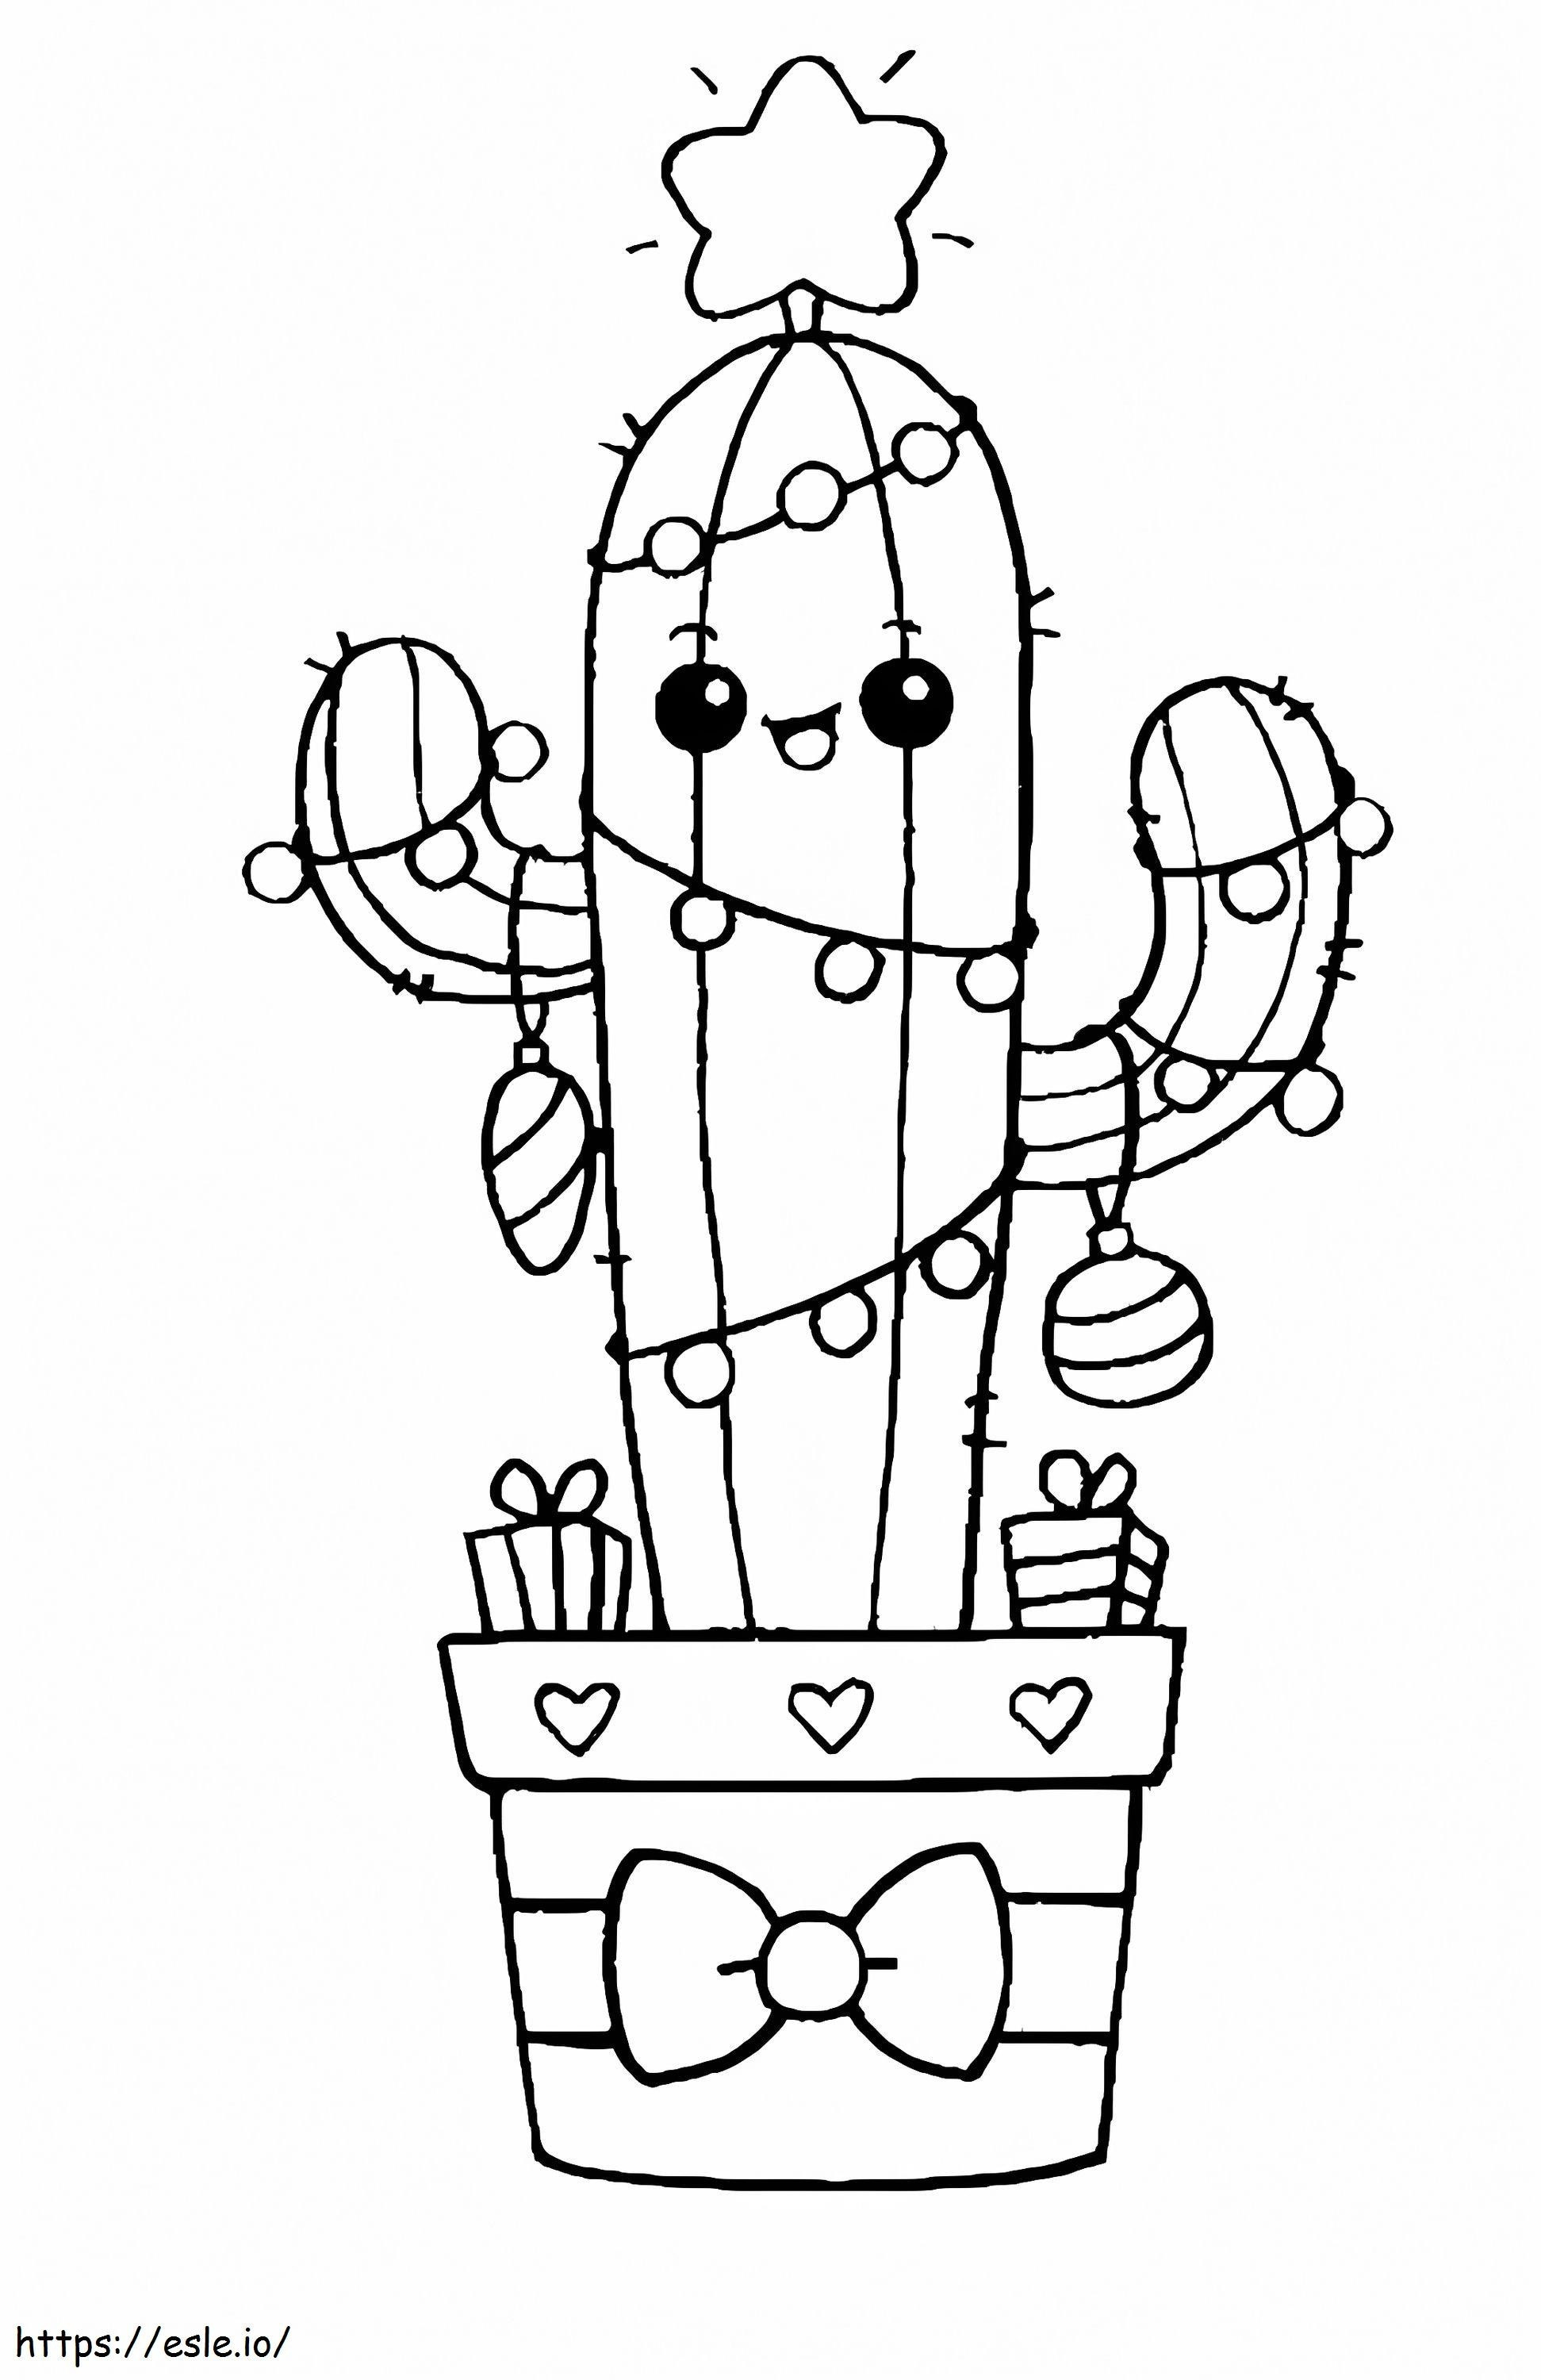 Cactus Christmas Tree coloring page